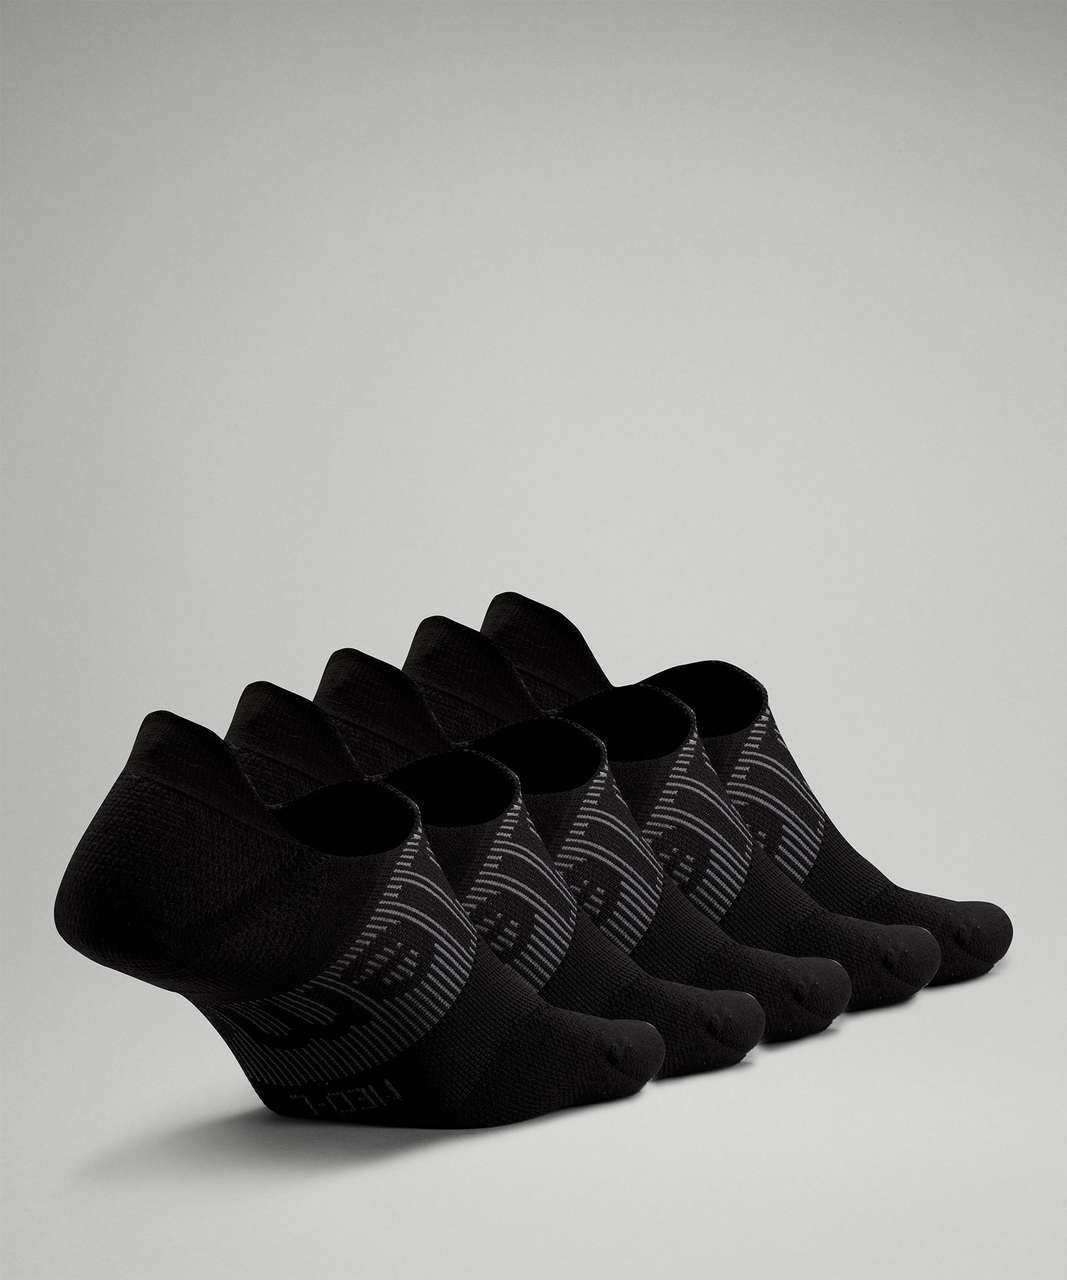 Lululemon Power Stride No-Show Sock with Active Grip 5 Pack - Black